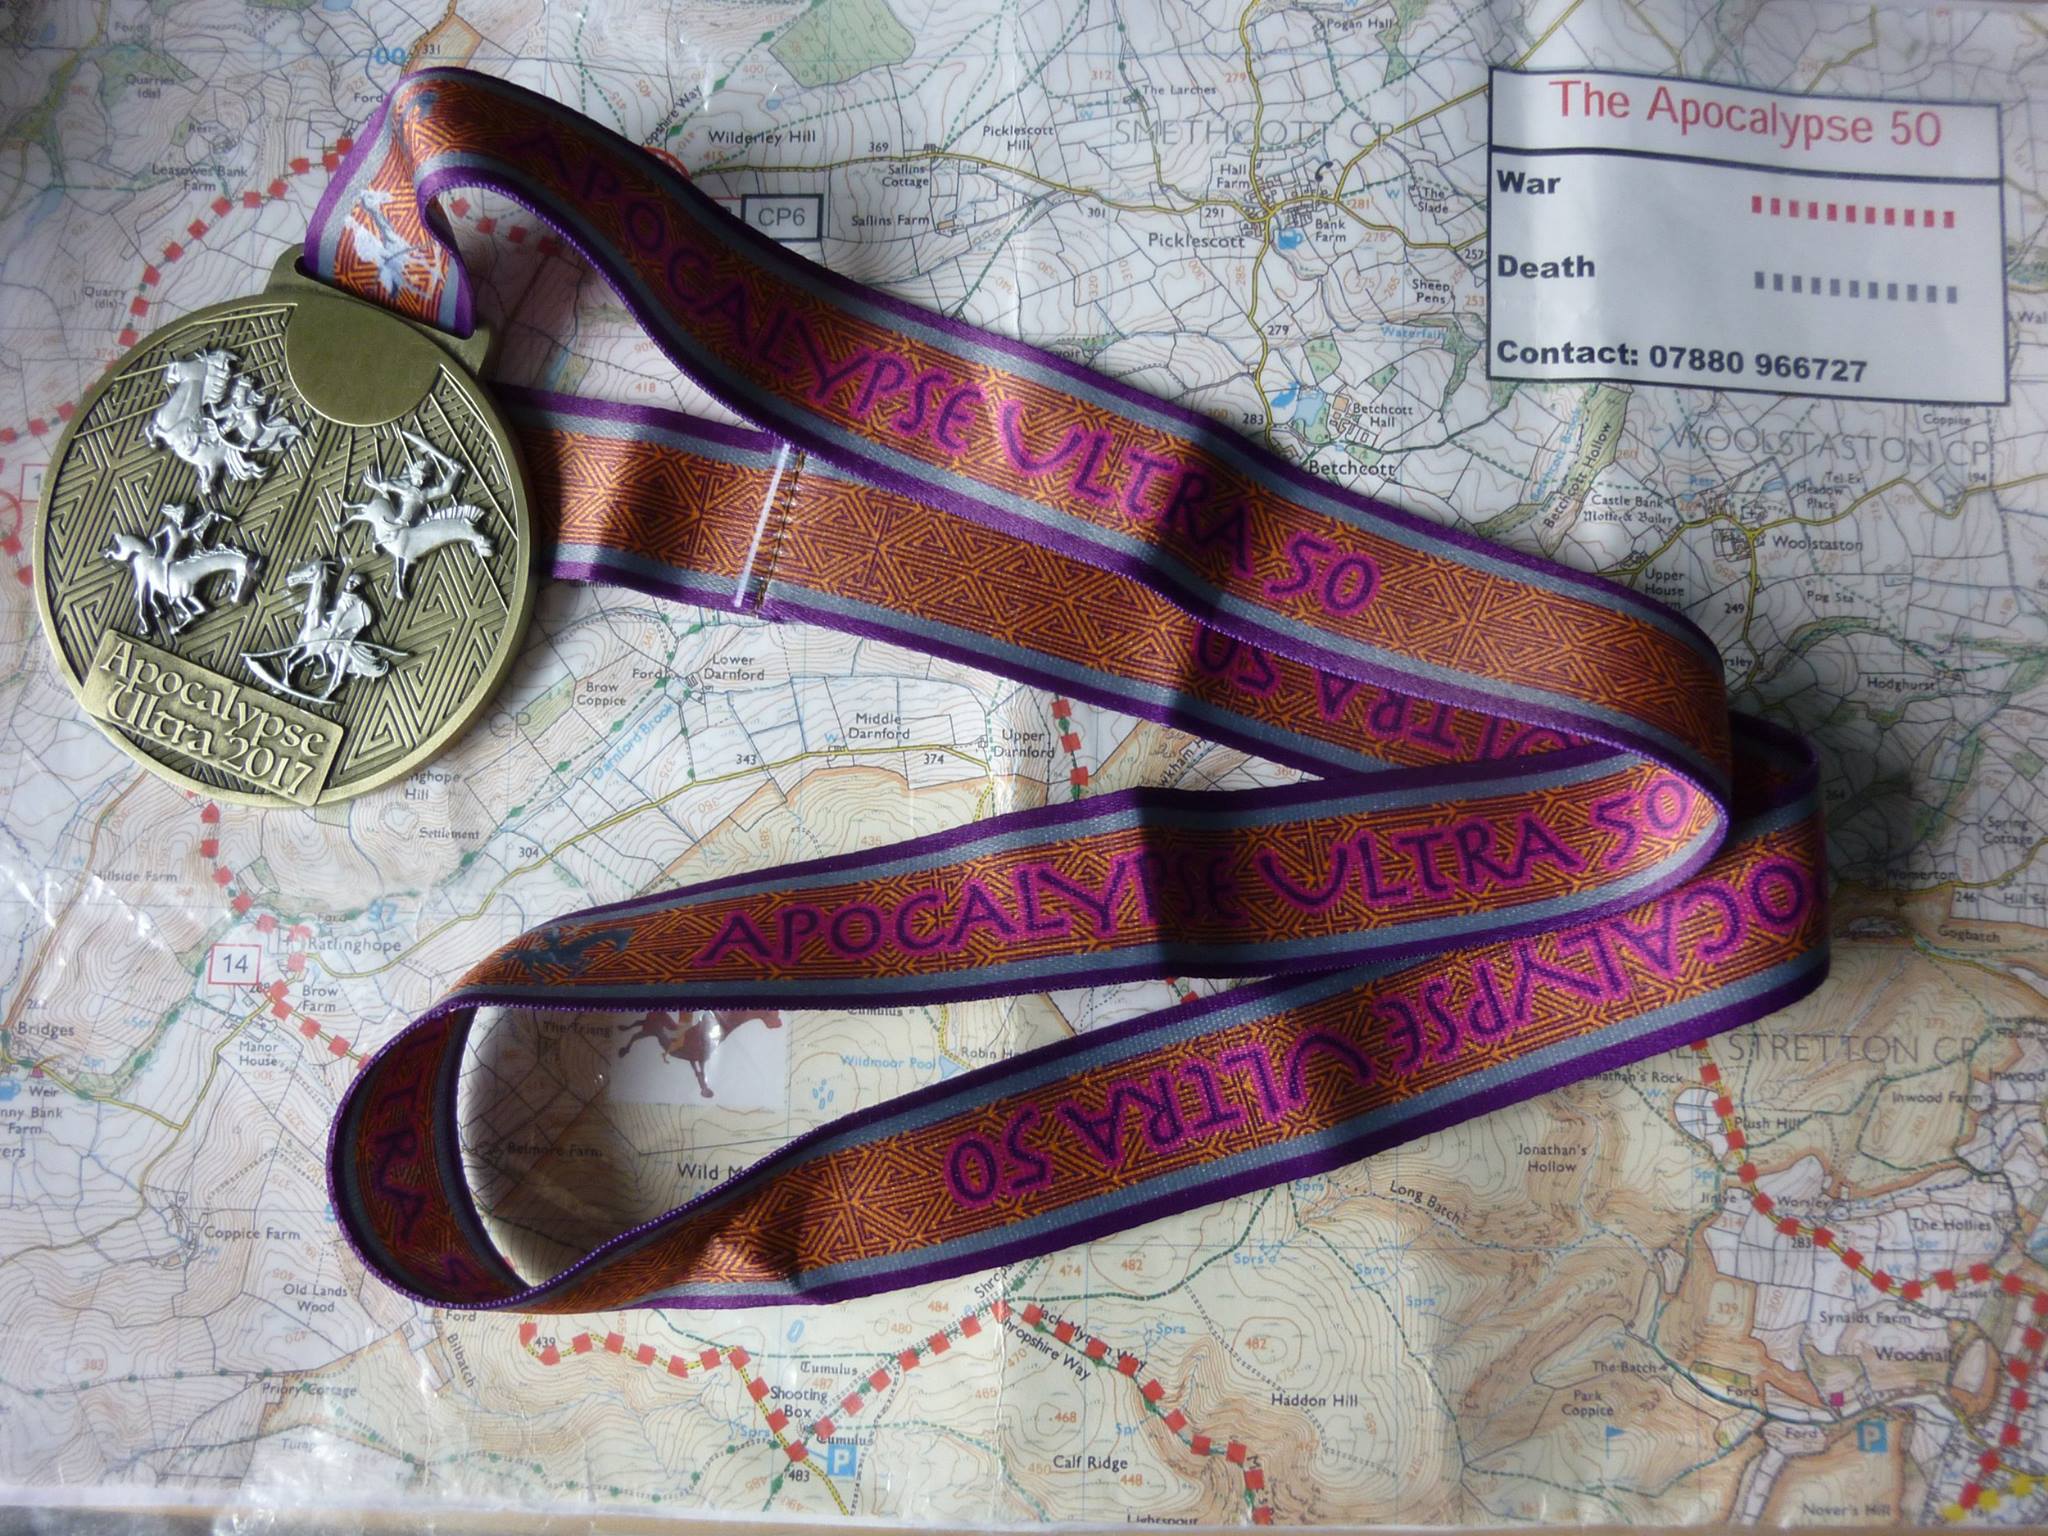 Apocalypse 50 Medal and Map